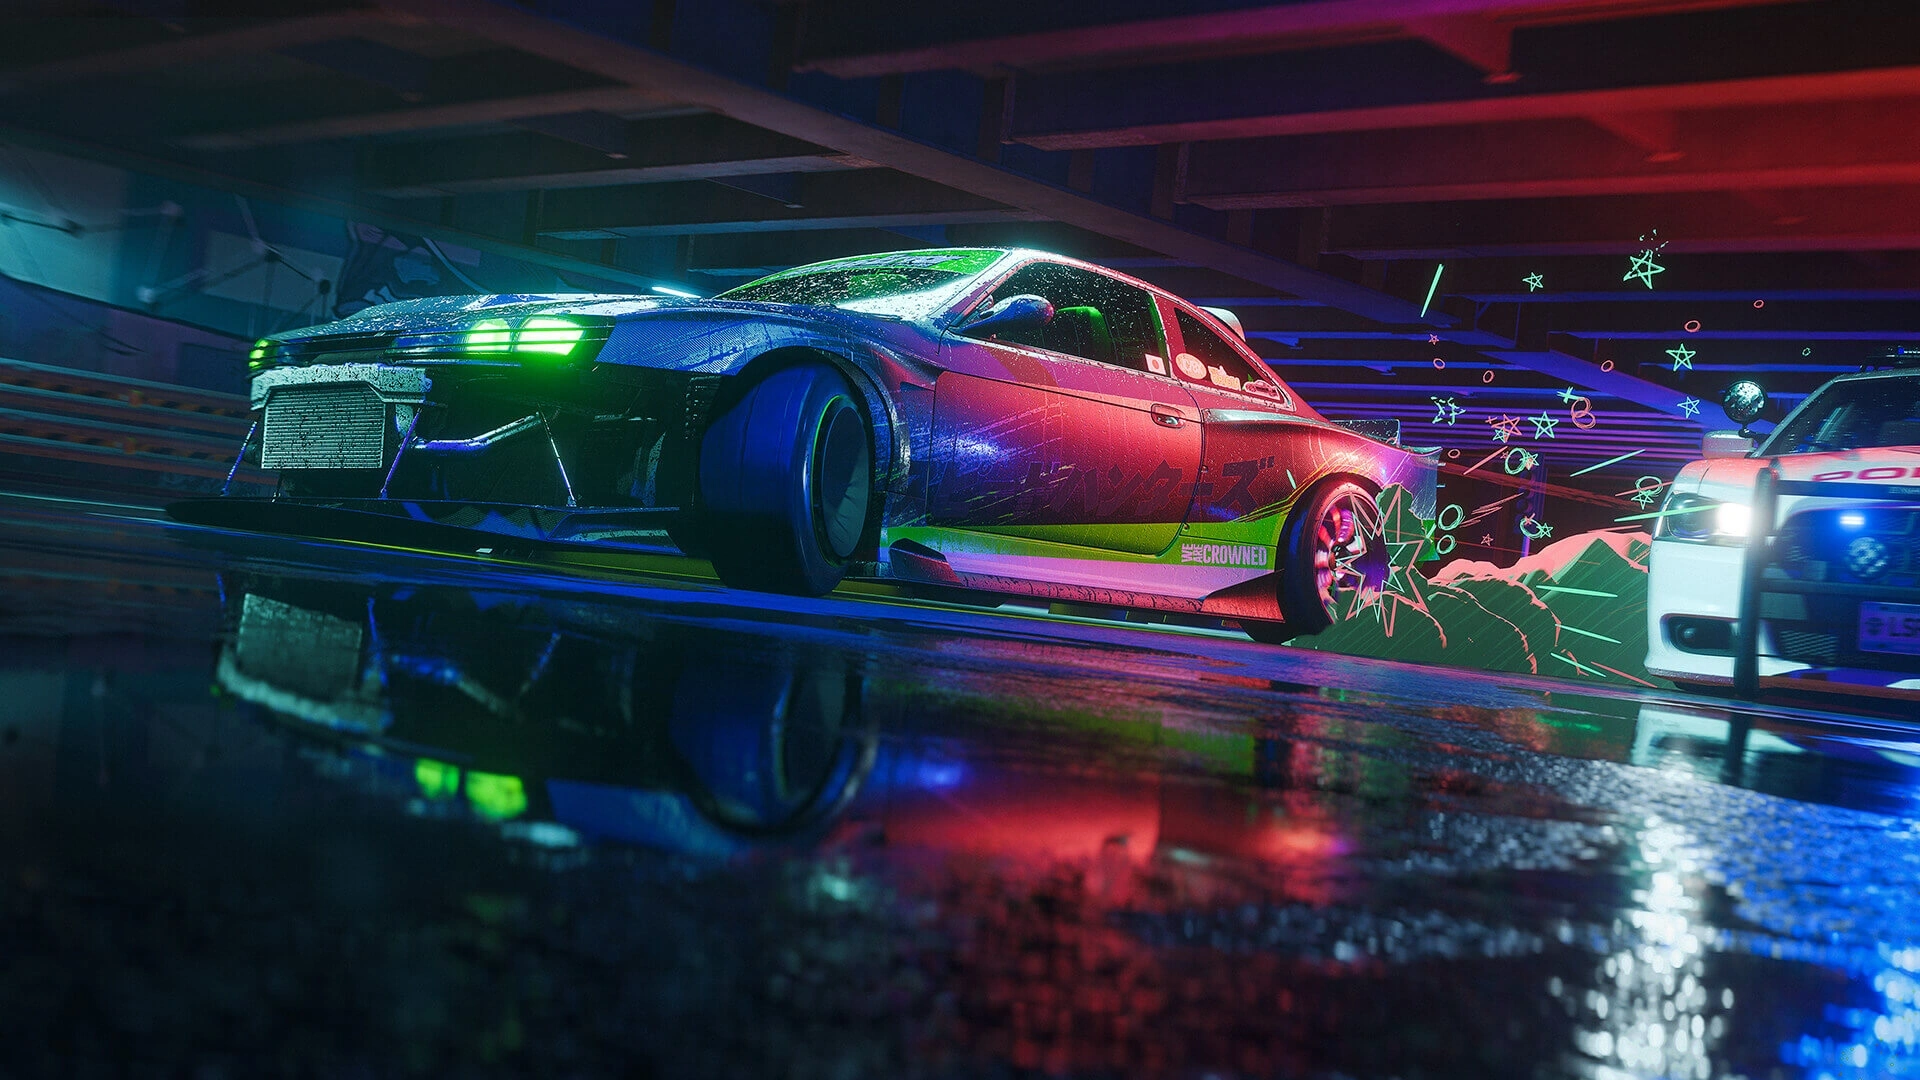 Need For Speed Unbound İnceleme